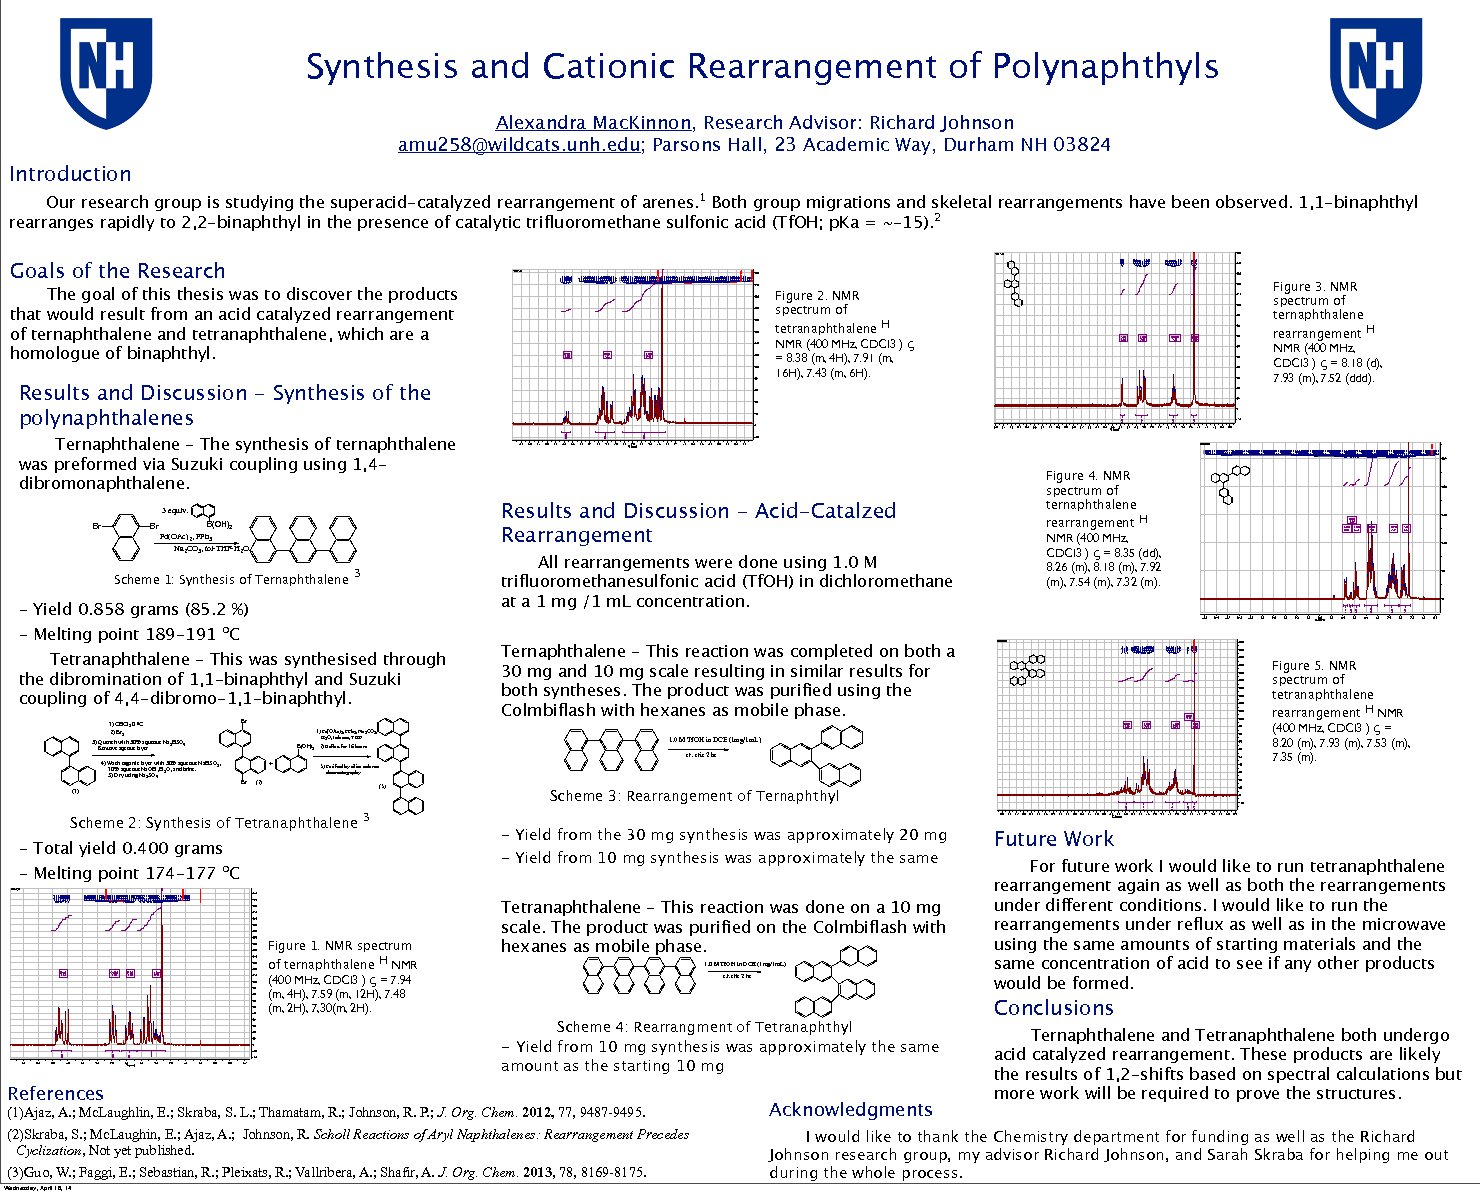 Synthesis And Cationic Rearrangement Of Polynaphthyls by amu258